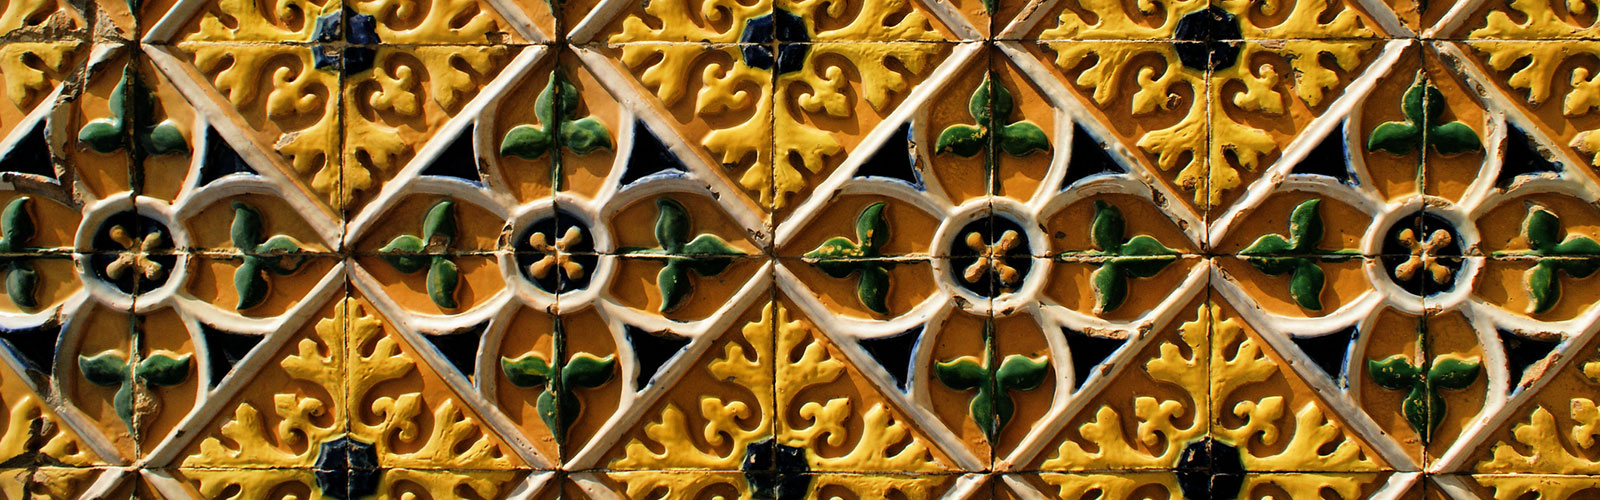 A yellow, green, and brown tile wall 